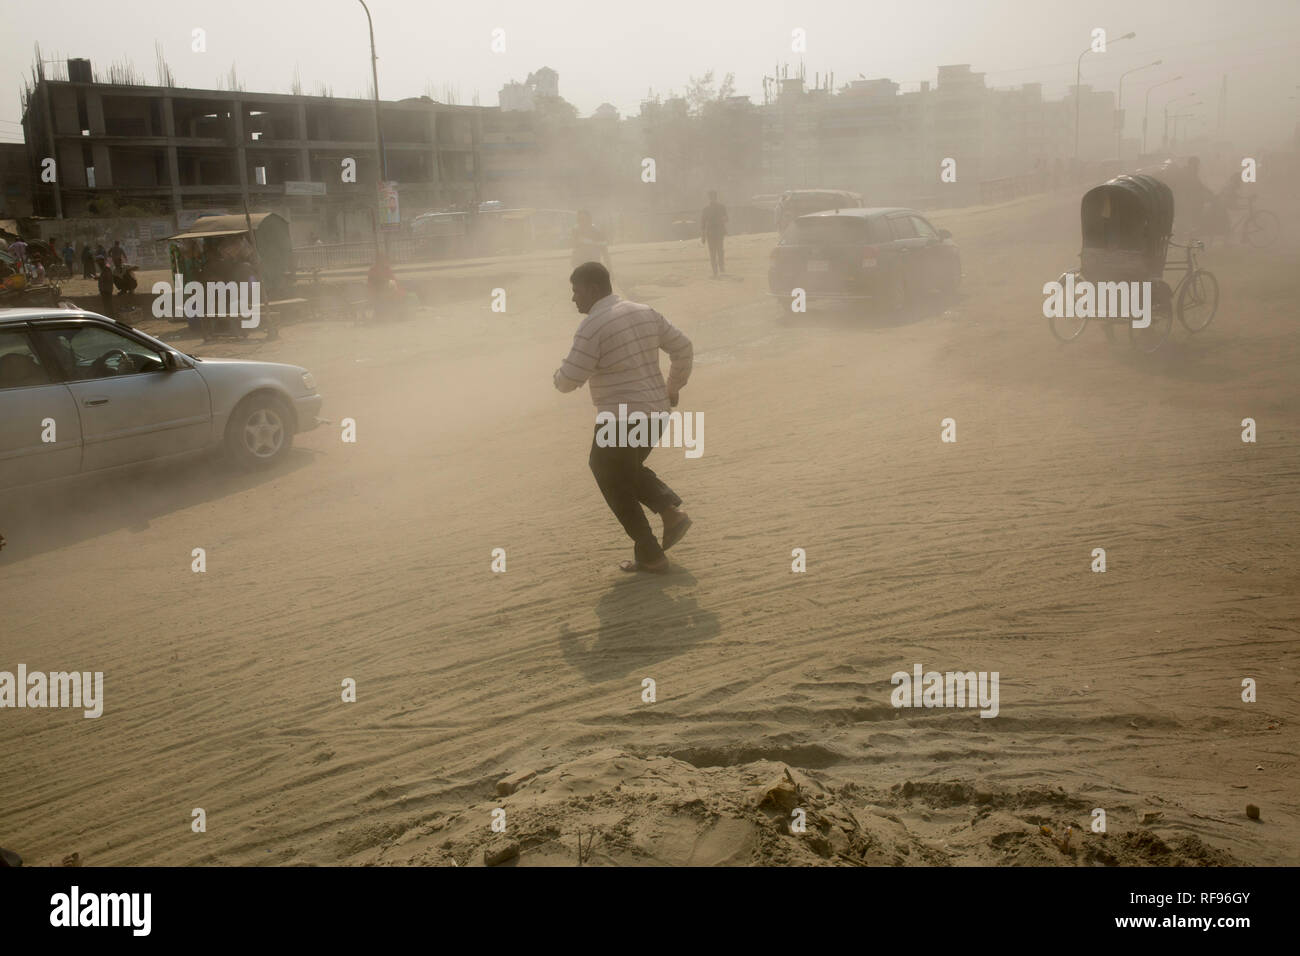 DHAKA, BANGLADESH - JANUARY 23 : Dust pollution reaches an alarming stage in Dhaka and many deaths as well as several million cases of illness occur every year due to the poor air quality in Dhaka, Bangladesh on January 23, 2019.   Dust kicked up by vehicles traveling on roads may make up 33% of air pollution. Road dust consists of deposits of vehicle exhausts and industrial exhausts, particles from tire and brake wear, dust from paved roads or potholes, and dust from construction sites. Road dust is a significant source contributing to the generation and release of particulate matter into the Stock Photo